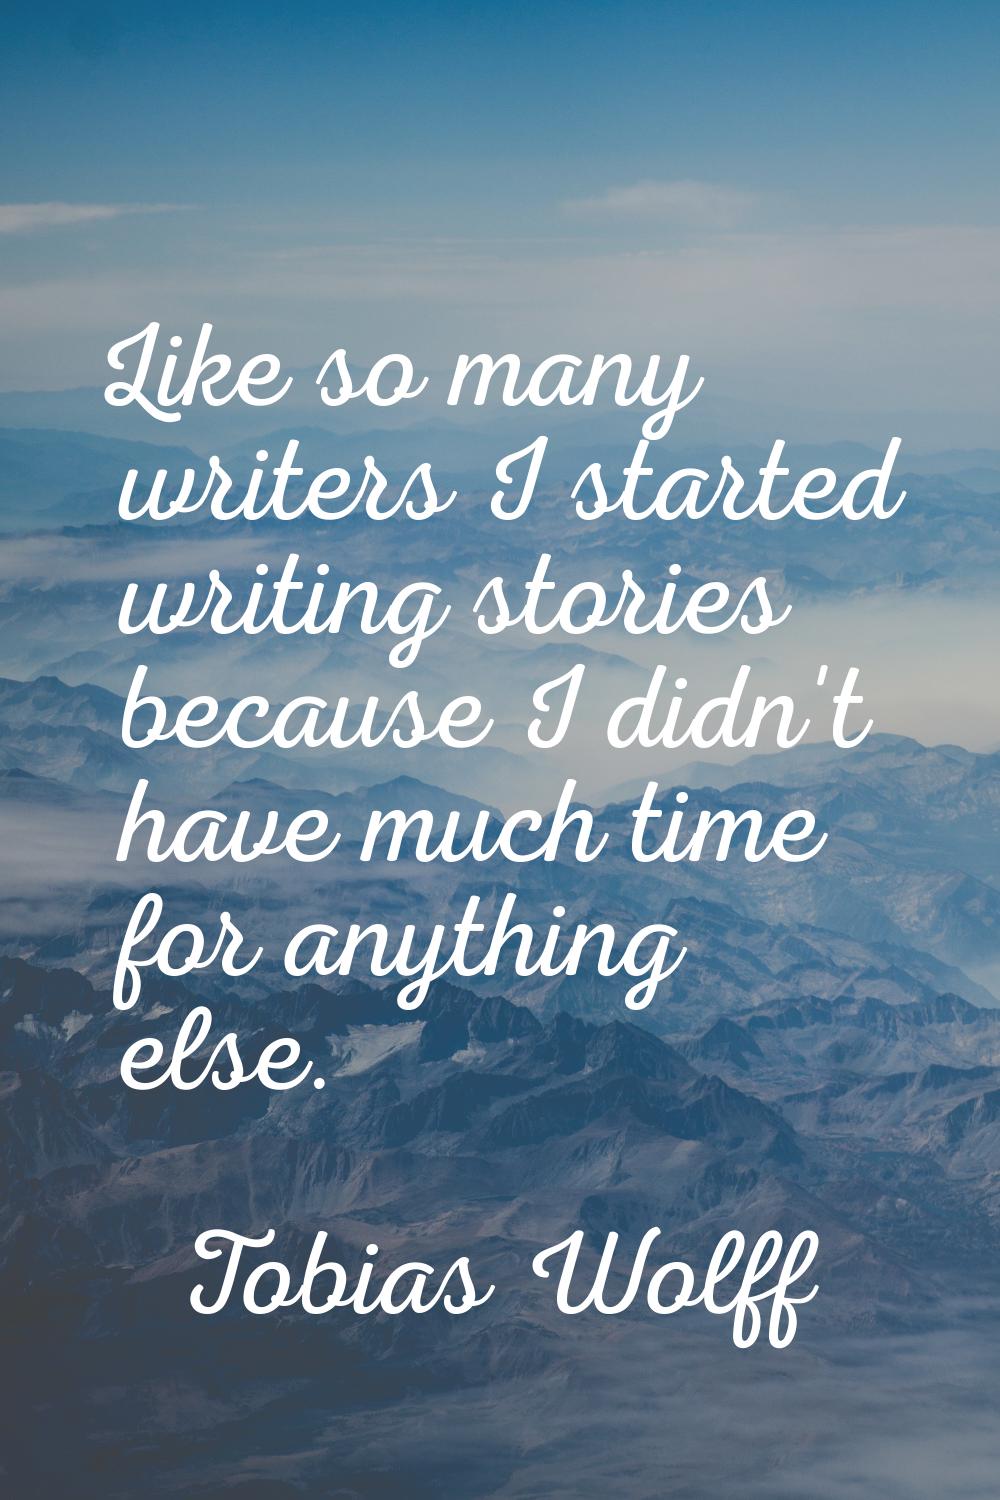 Like so many writers I started writing stories because I didn't have much time for anything else.